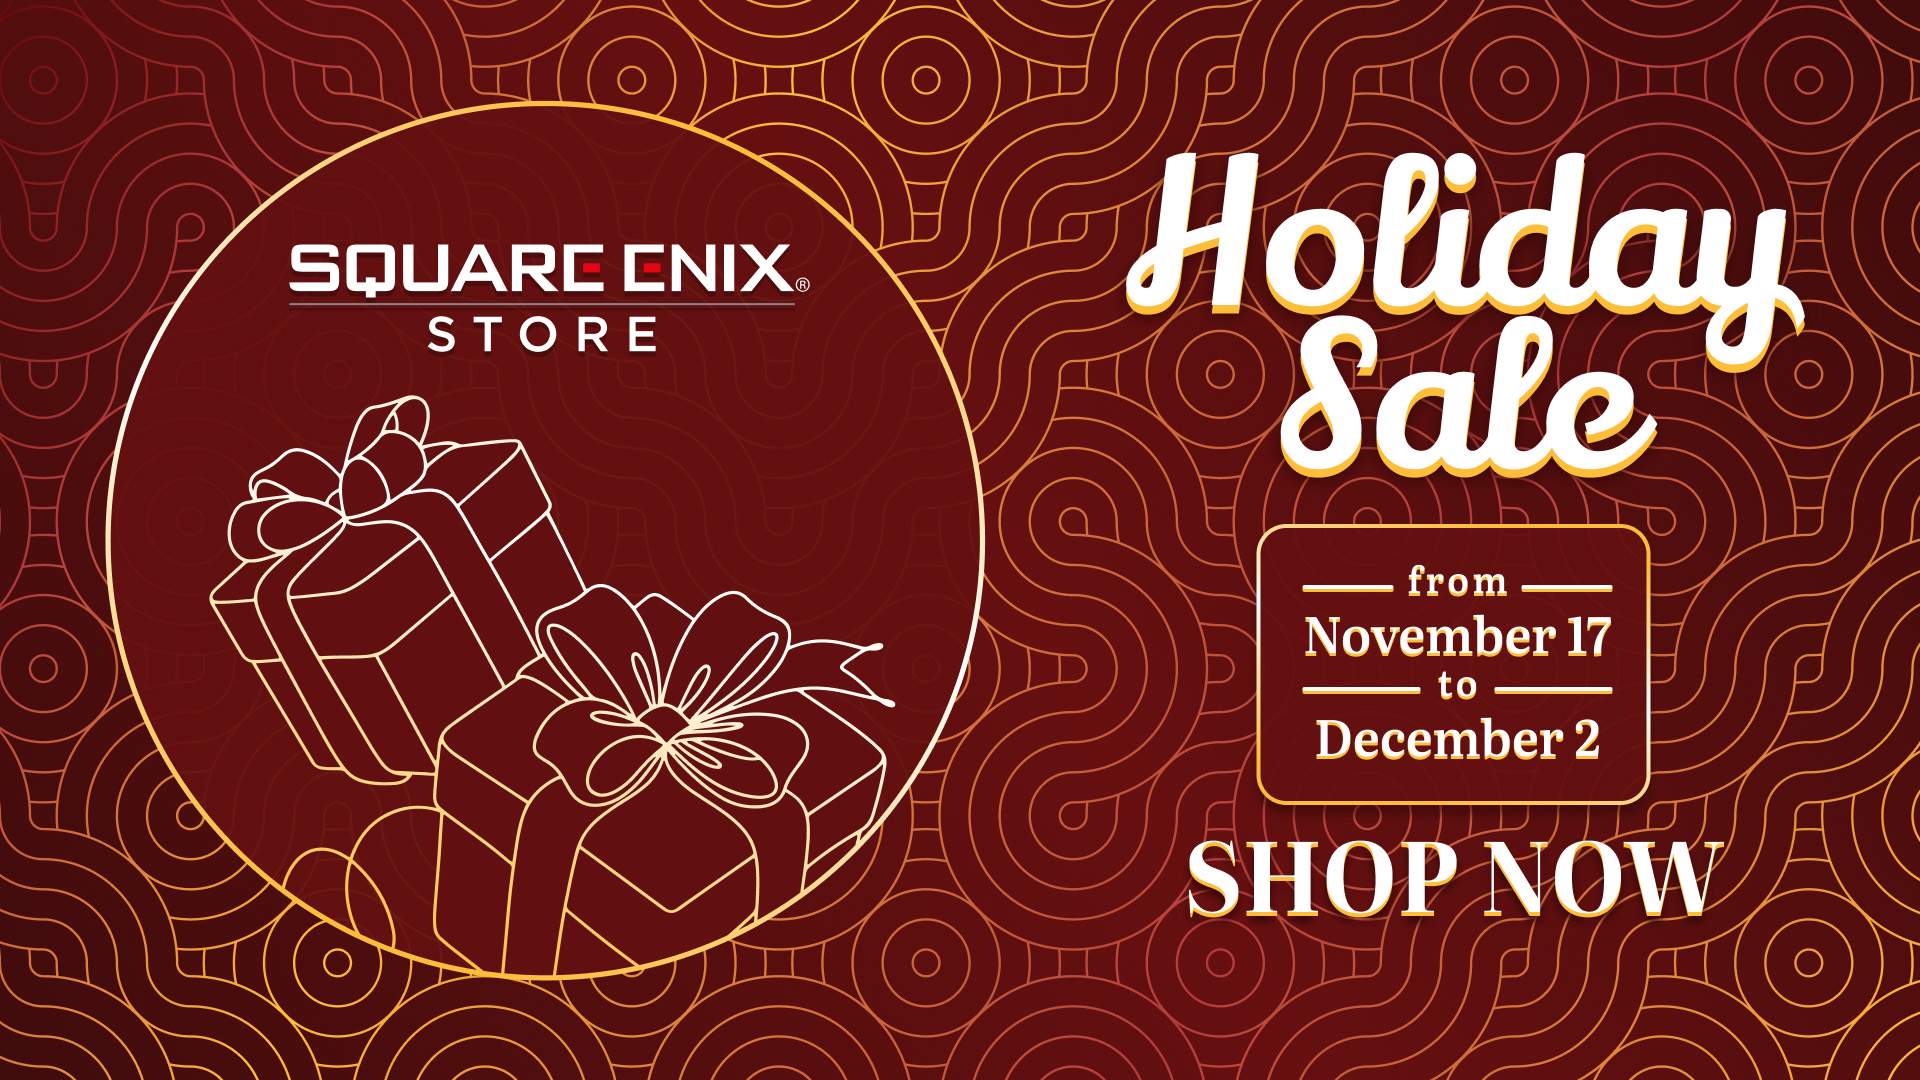 SE Store Holiday Sale from November 17 to December 2